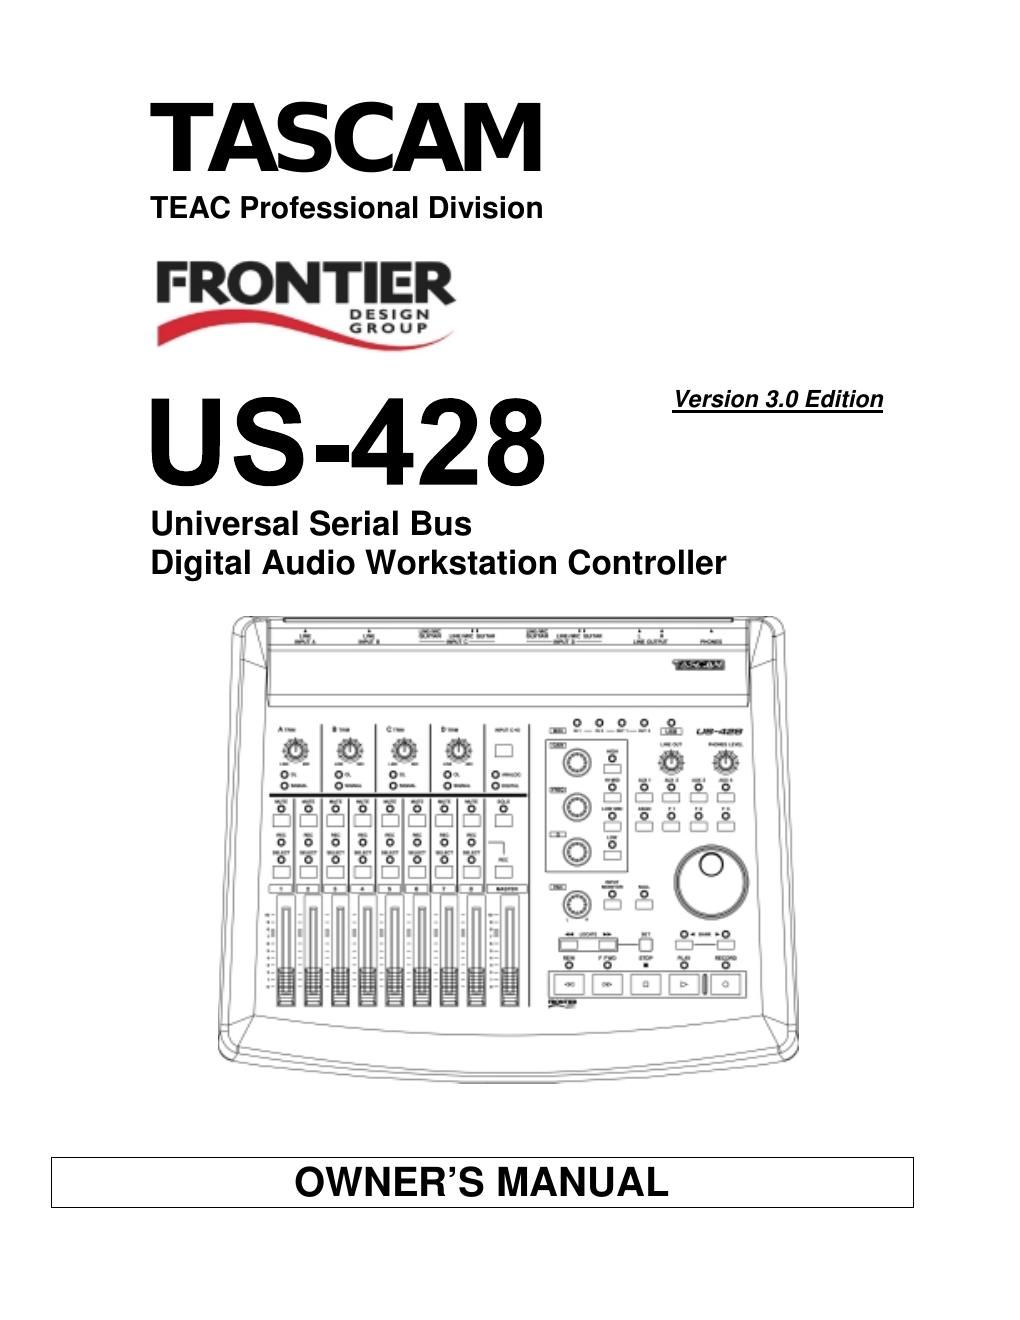 Tascam US 428 Owners Manual